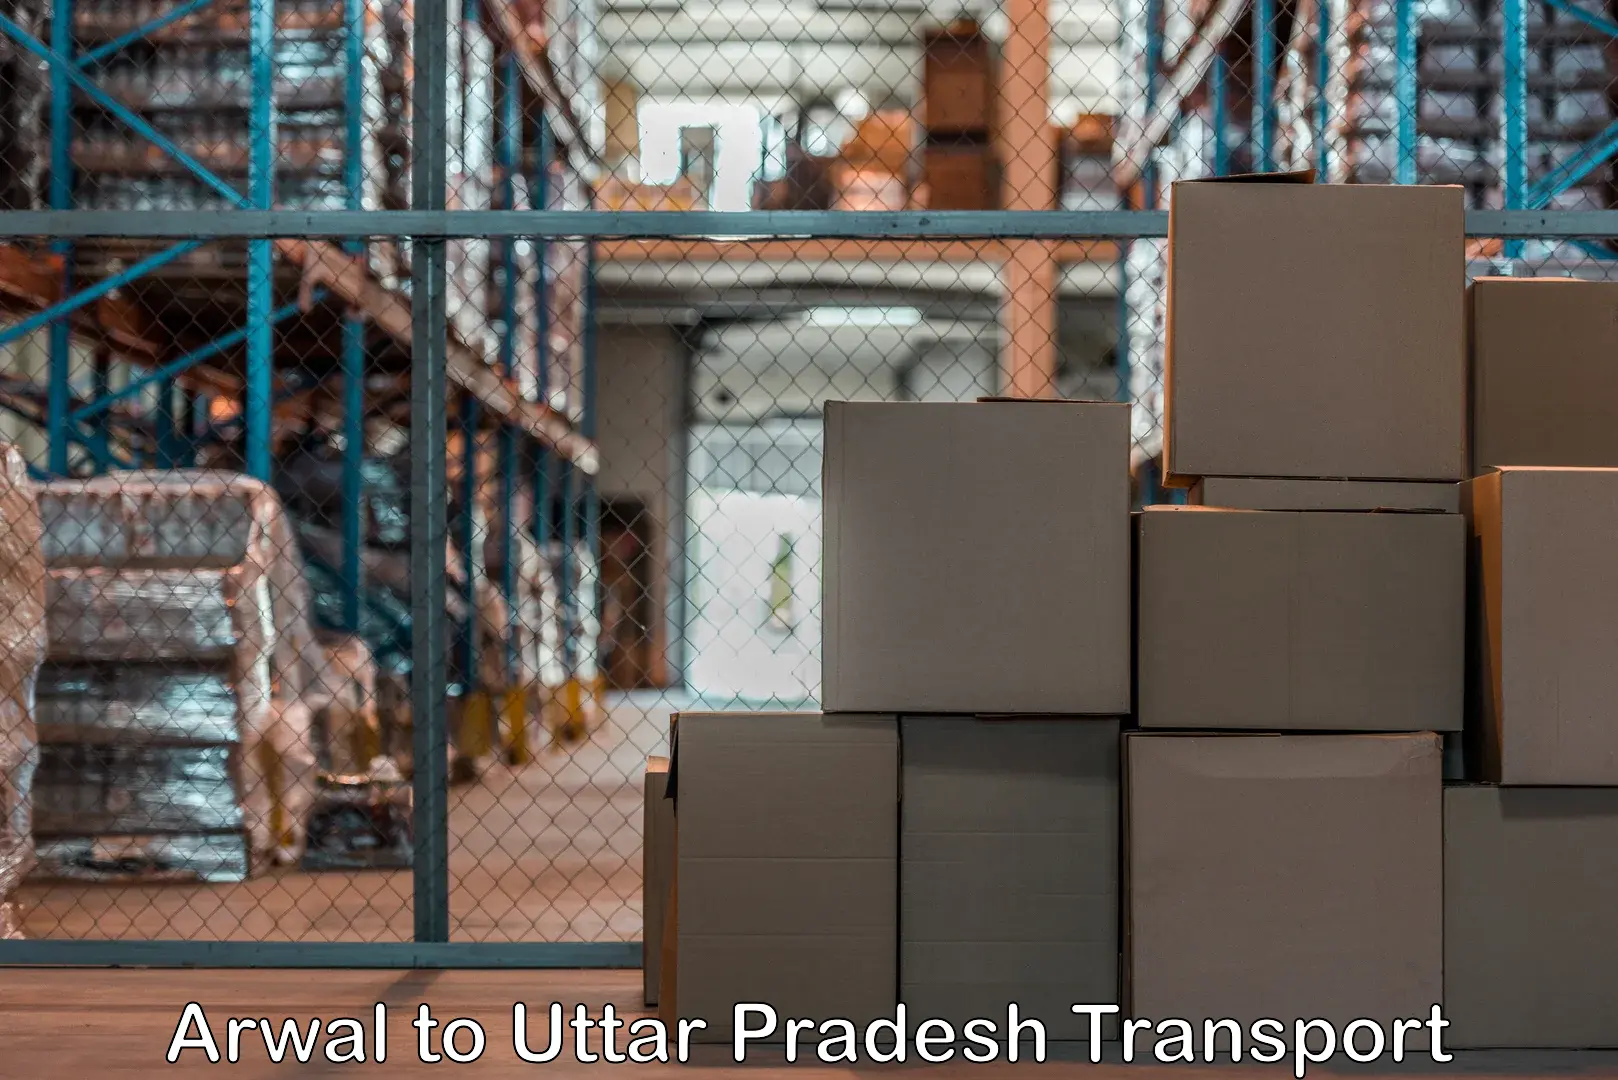 Truck transport companies in India Arwal to Banda